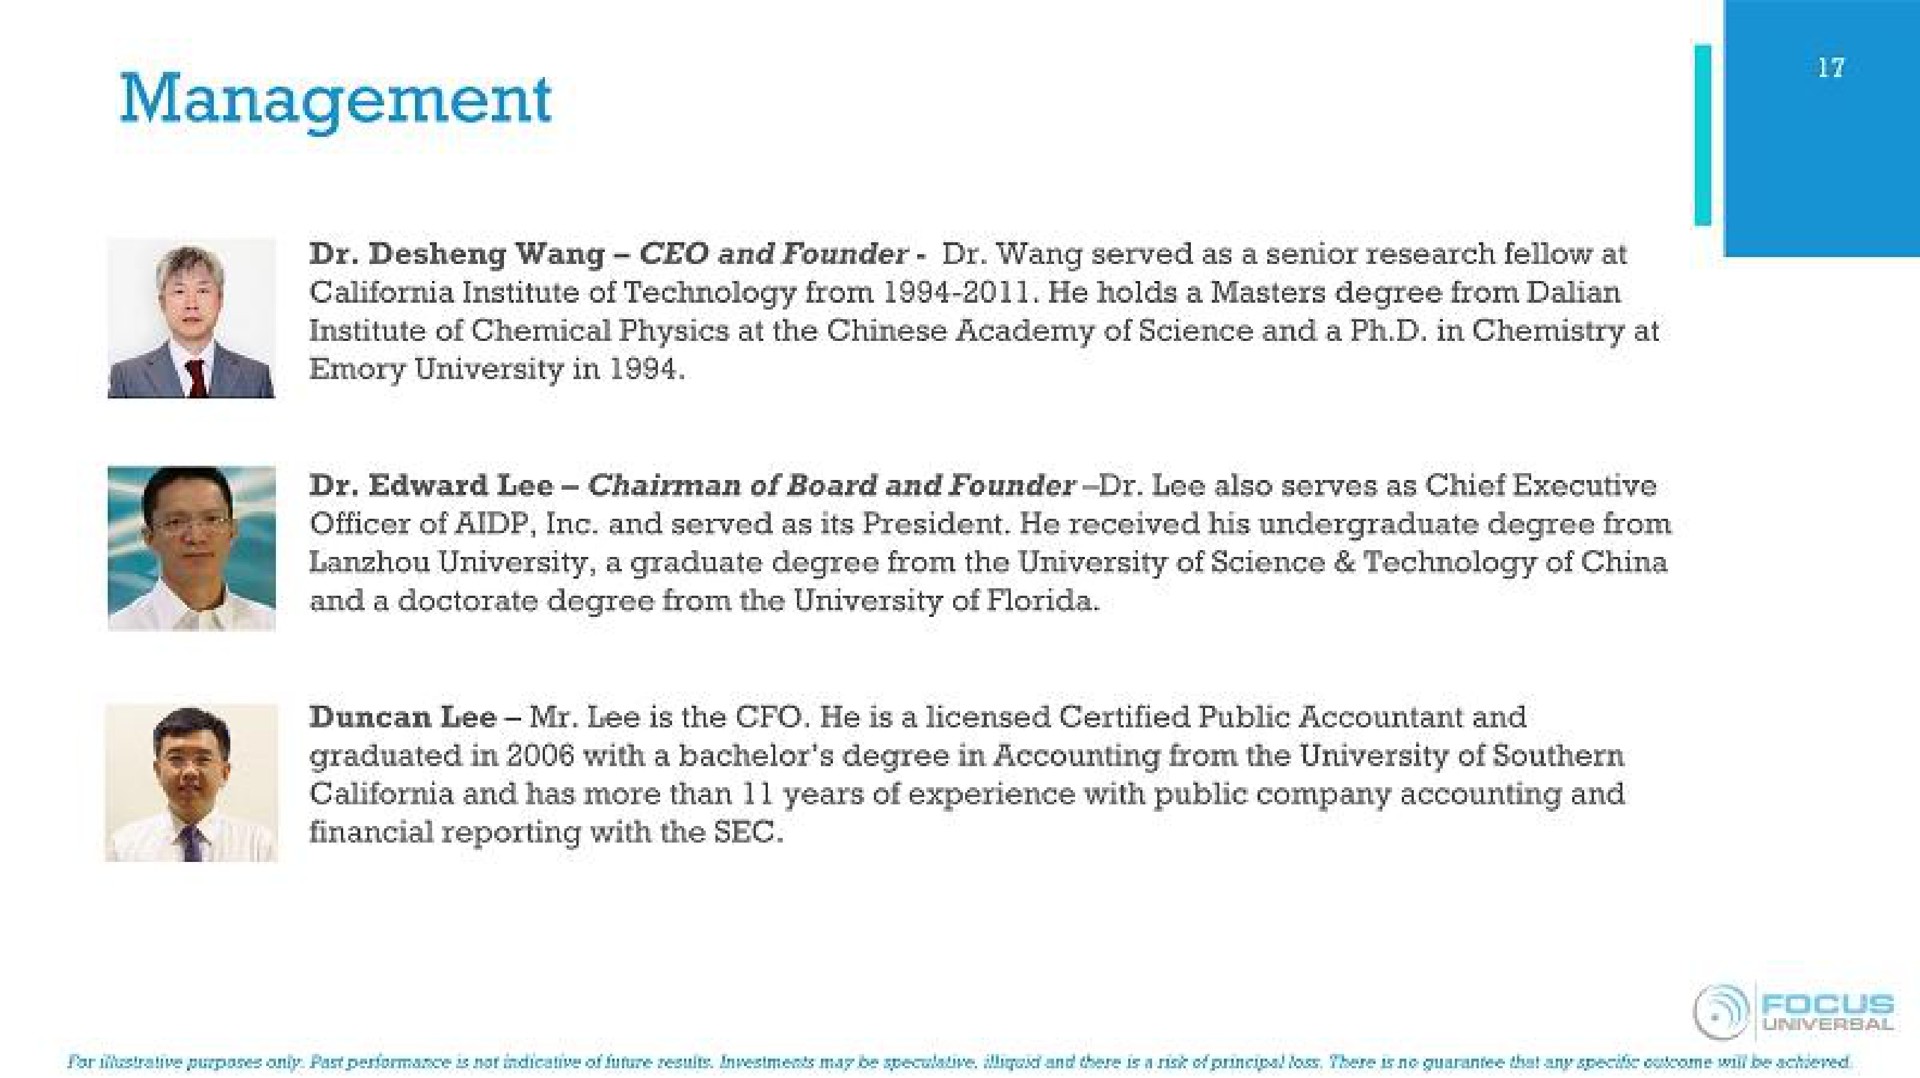 management wang and founder wang served as a senior research fellow at lee chairman of board and founder lee also serves as chief executive officer of and served as its president he received his undergraduate degree from university a graduate degree from the university of science technology of china and a doctorate degree from the university of graduated in with a bachelor degree in accounting from the university of southern and has more than years of experience with public company accounting and financial reporting with the sec | Focus Universal